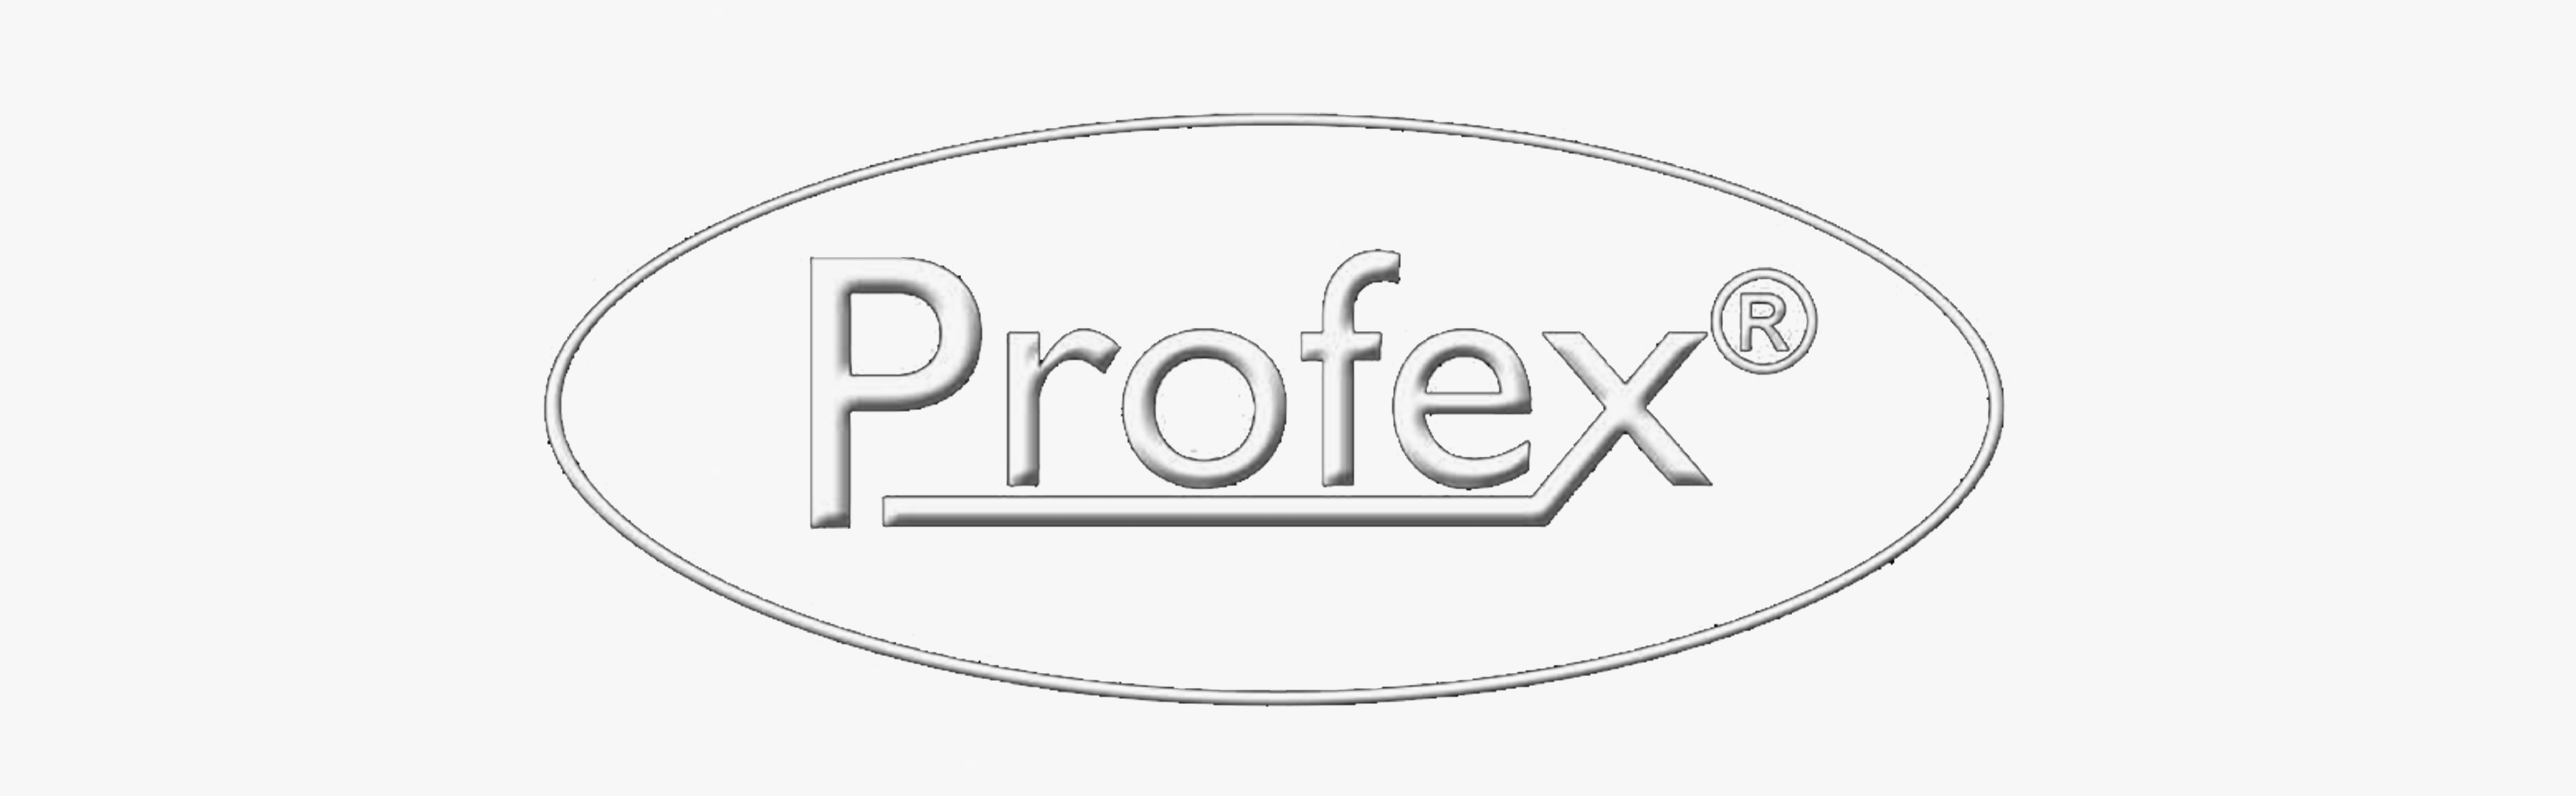 Profex Medical Products